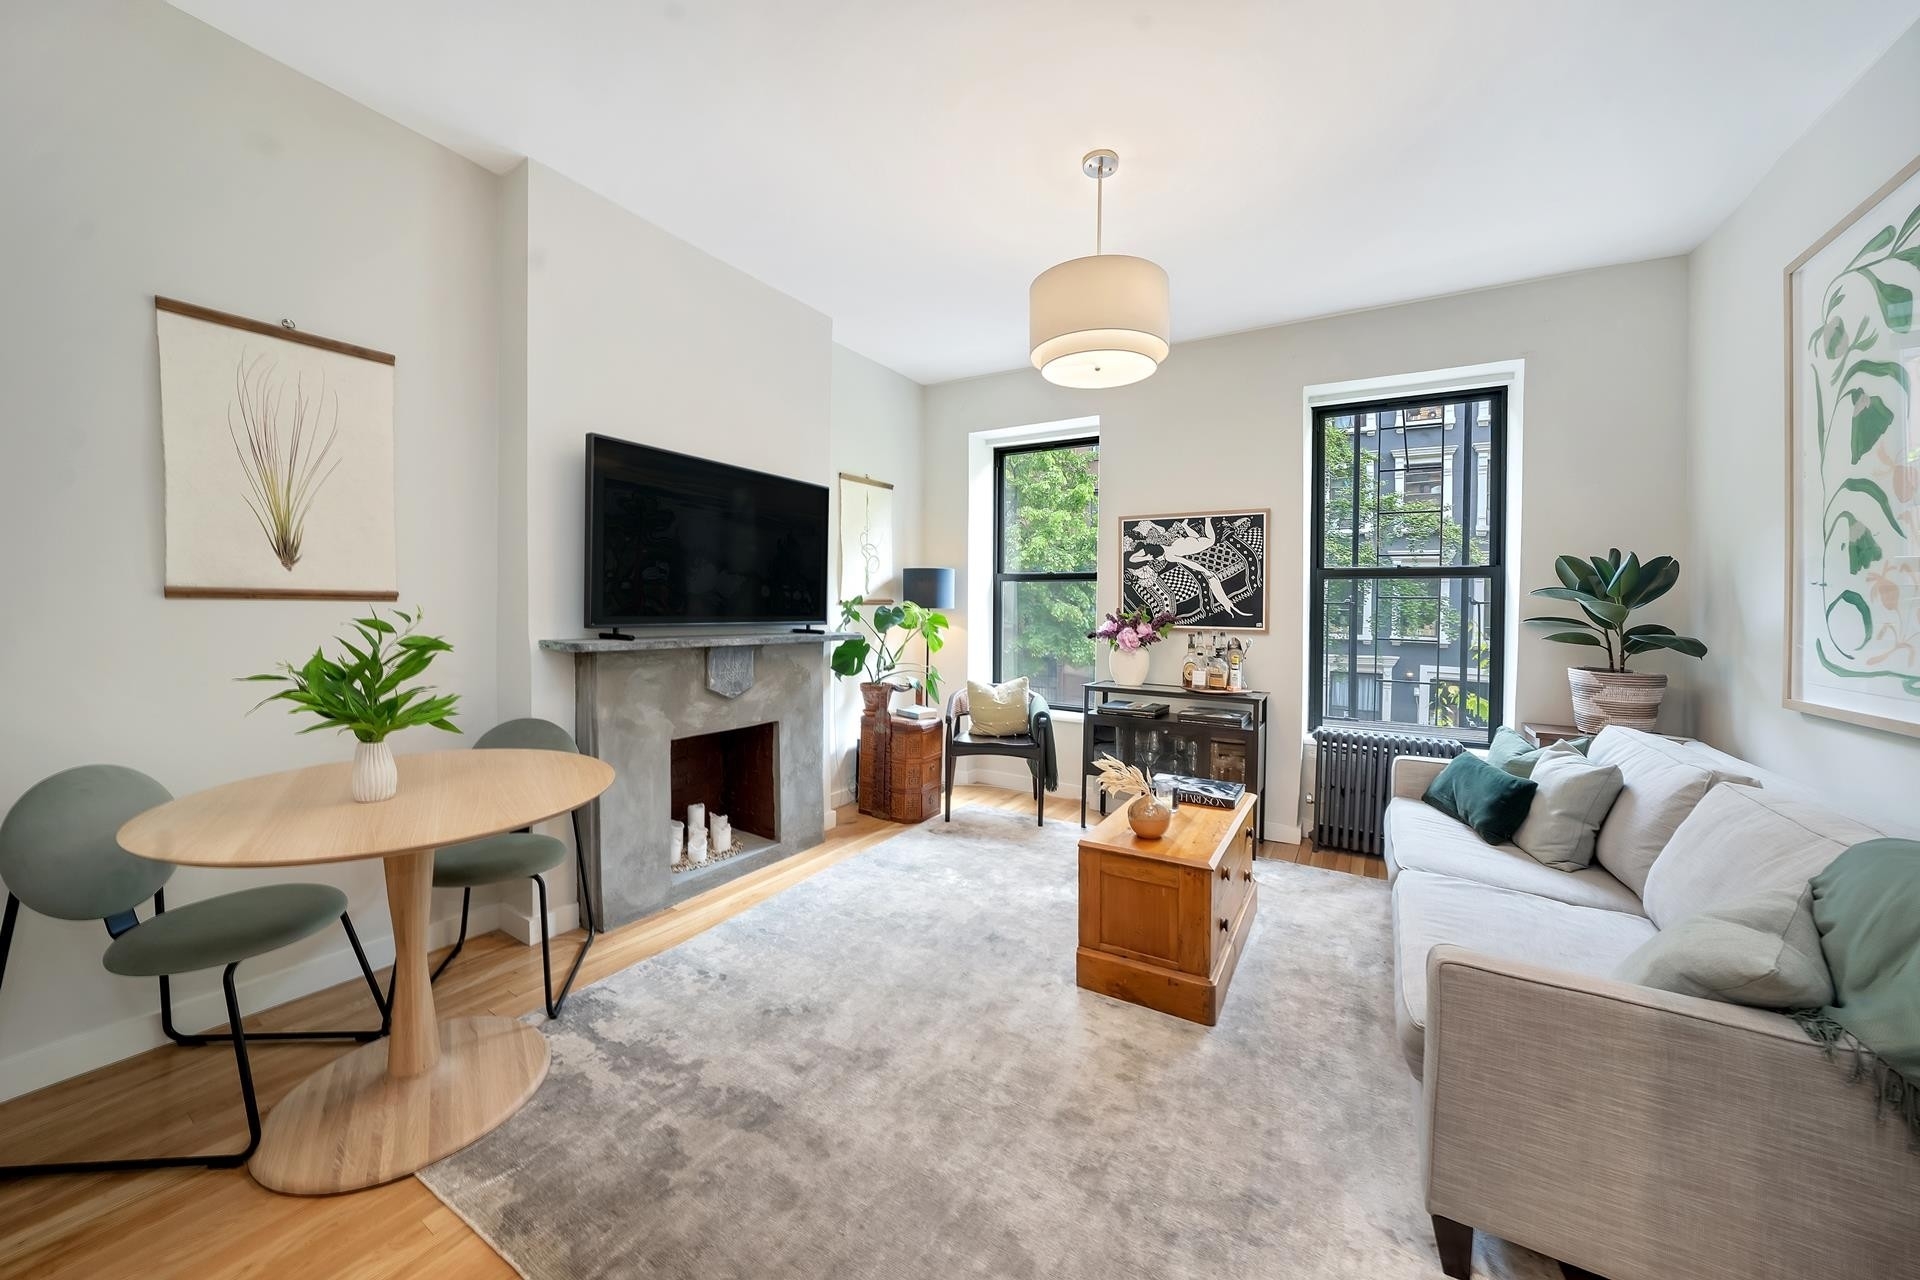 Co-op Properties for Sale at 353 W 47TH ST, 2FE Hell's Kitchen, New York, NY 10036